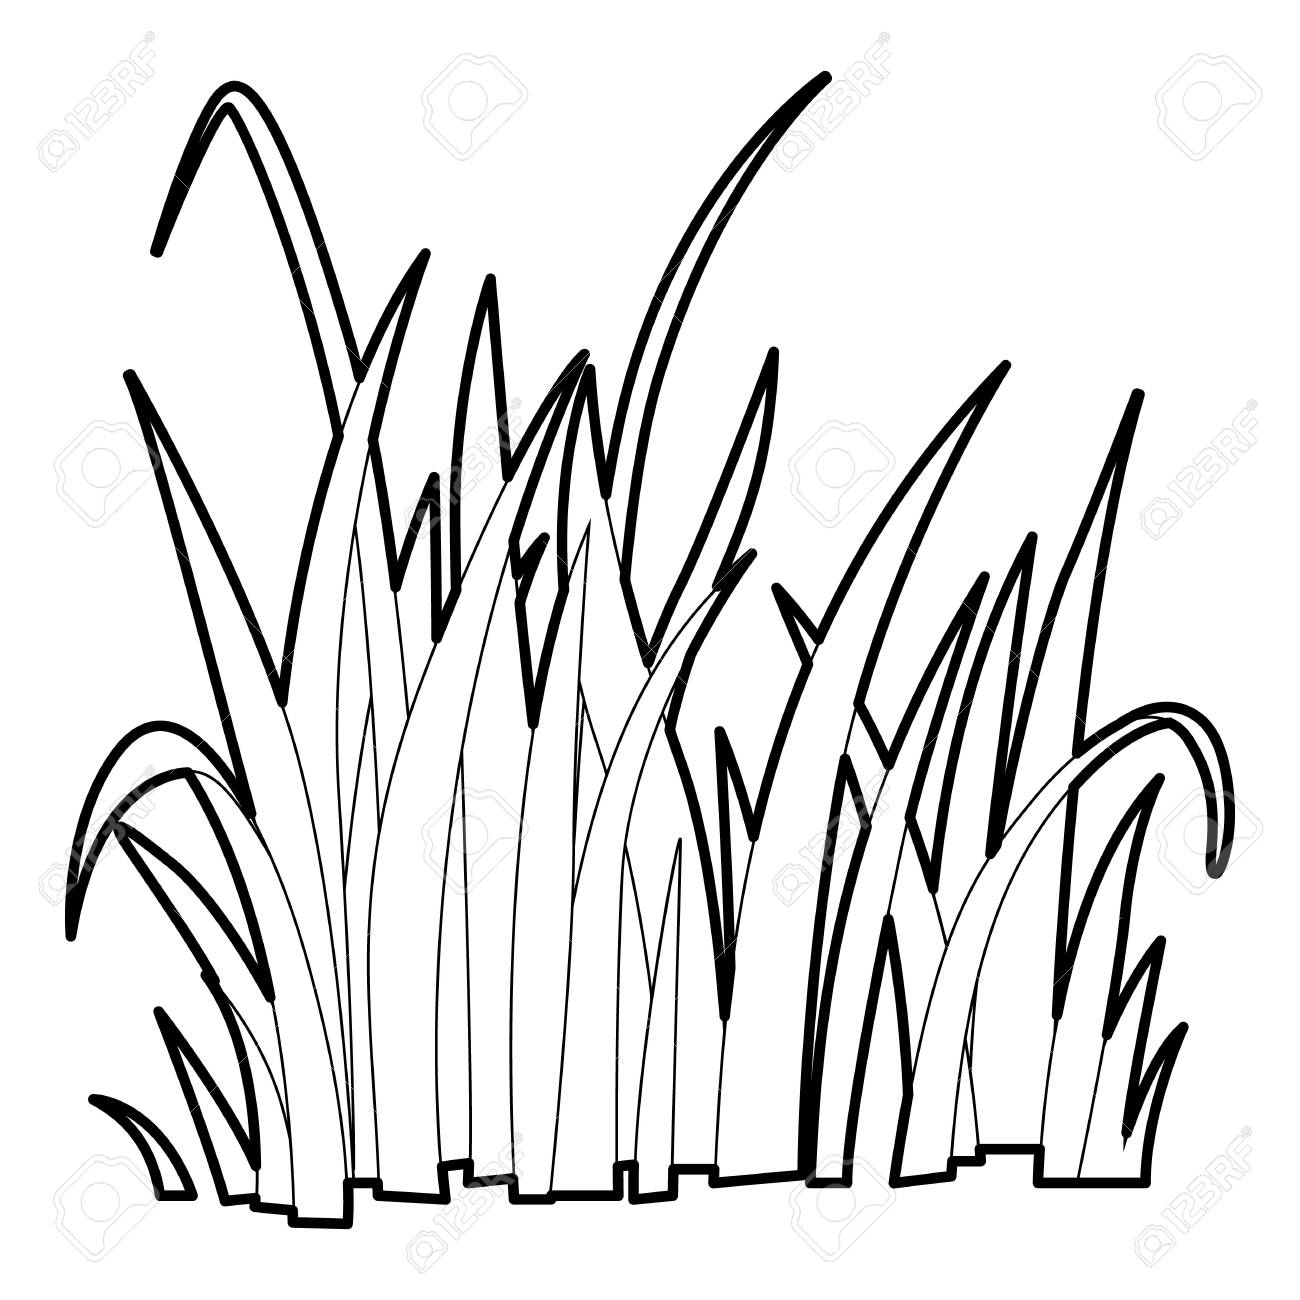 Grass icon, outline style.